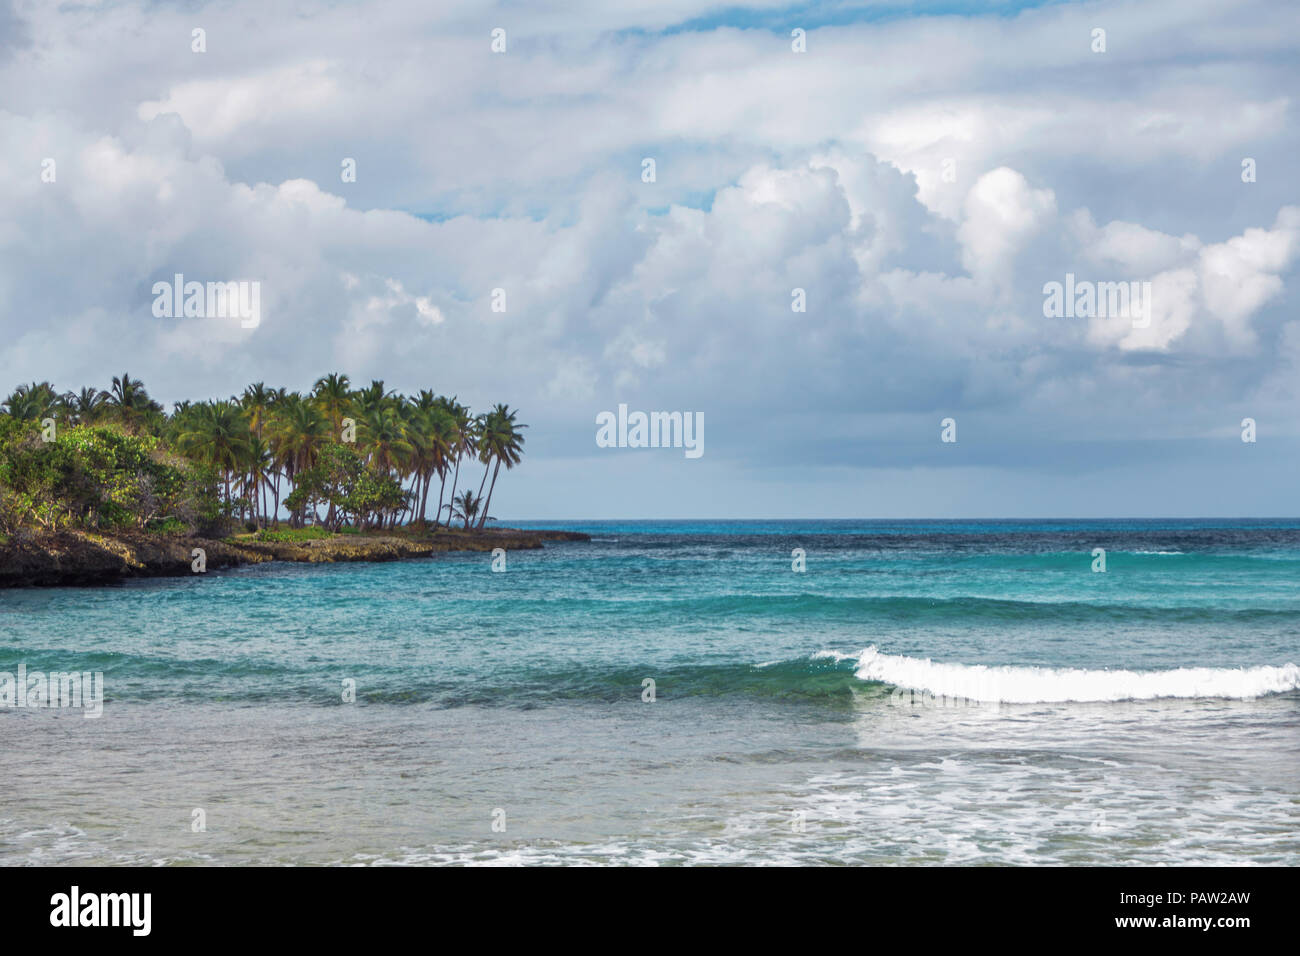 sea surf in Samana, Dominican Republic. Sea, shore with palm trees and sky with storm clouds Stock Photo